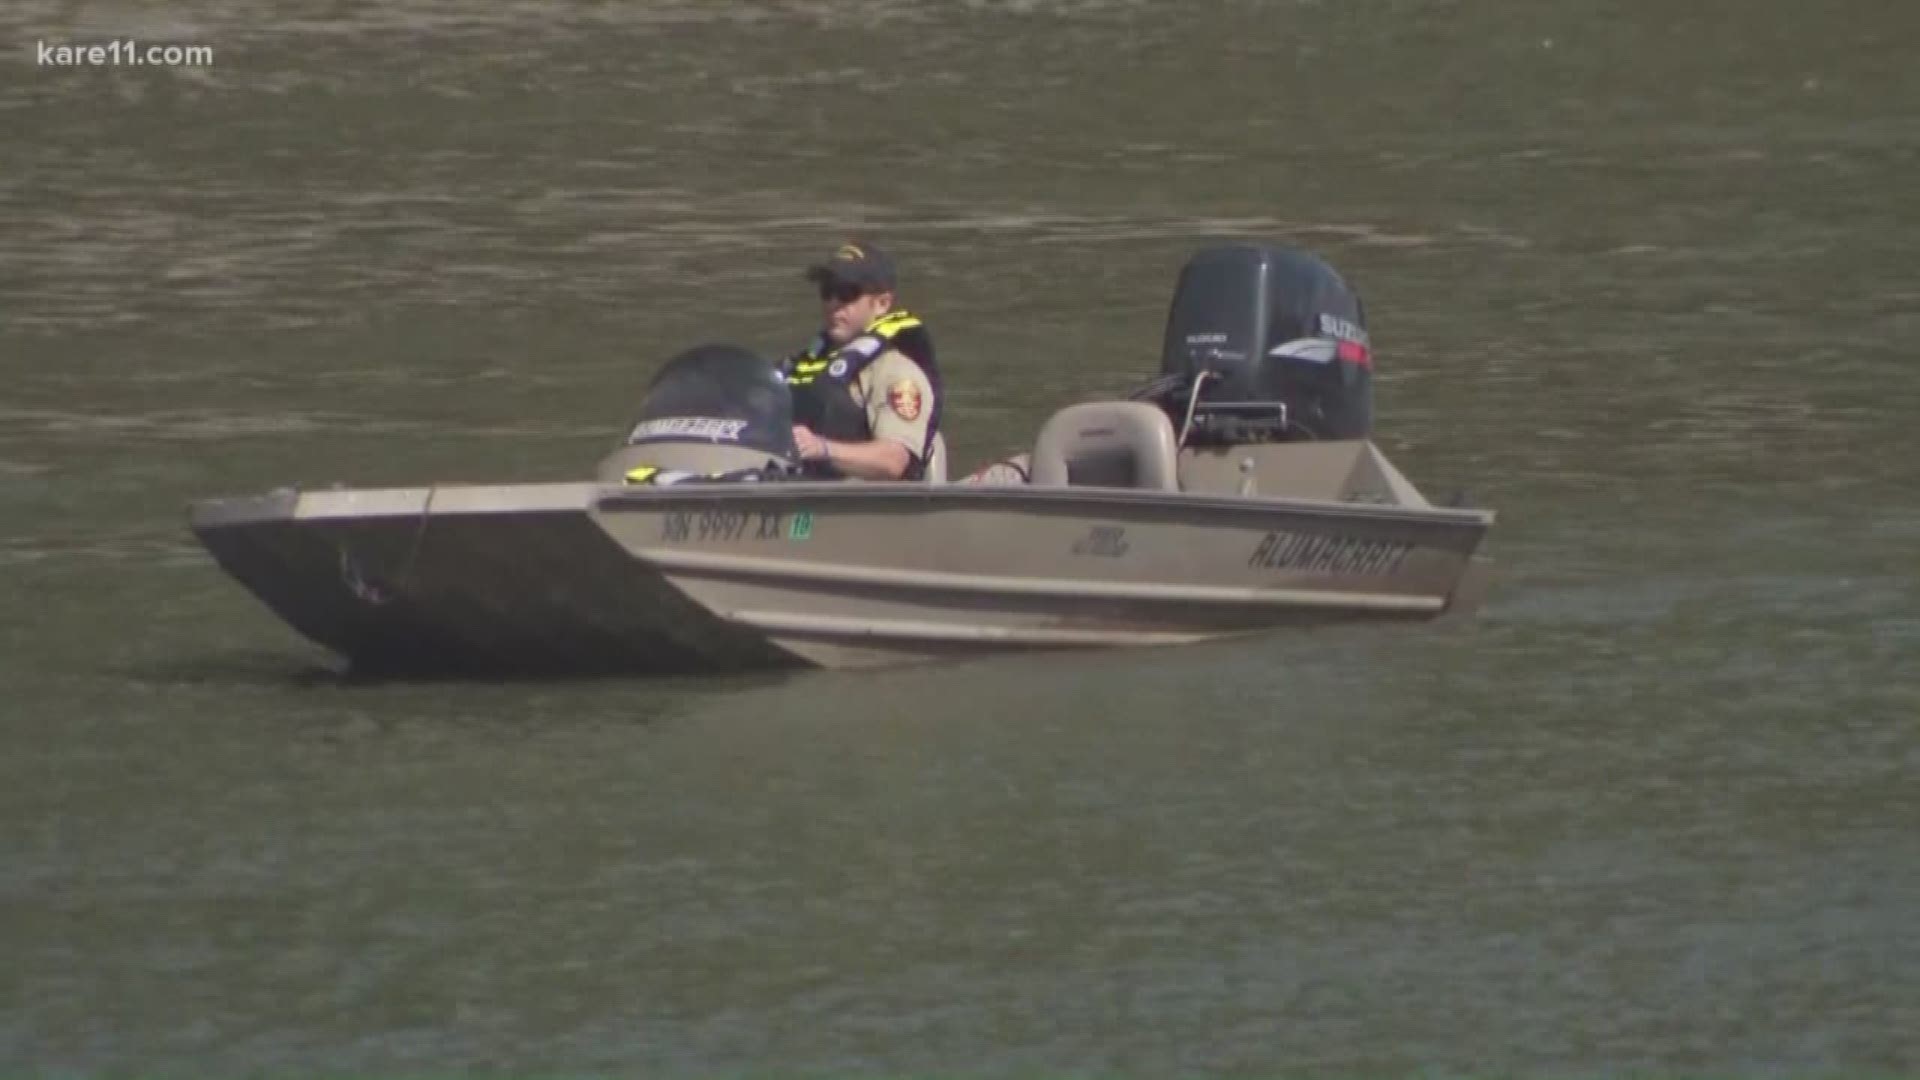 Law enforcement officers were dispatched to a stretch of the river near the Highway 25 Bridge after someone spotted the empty boat still running.